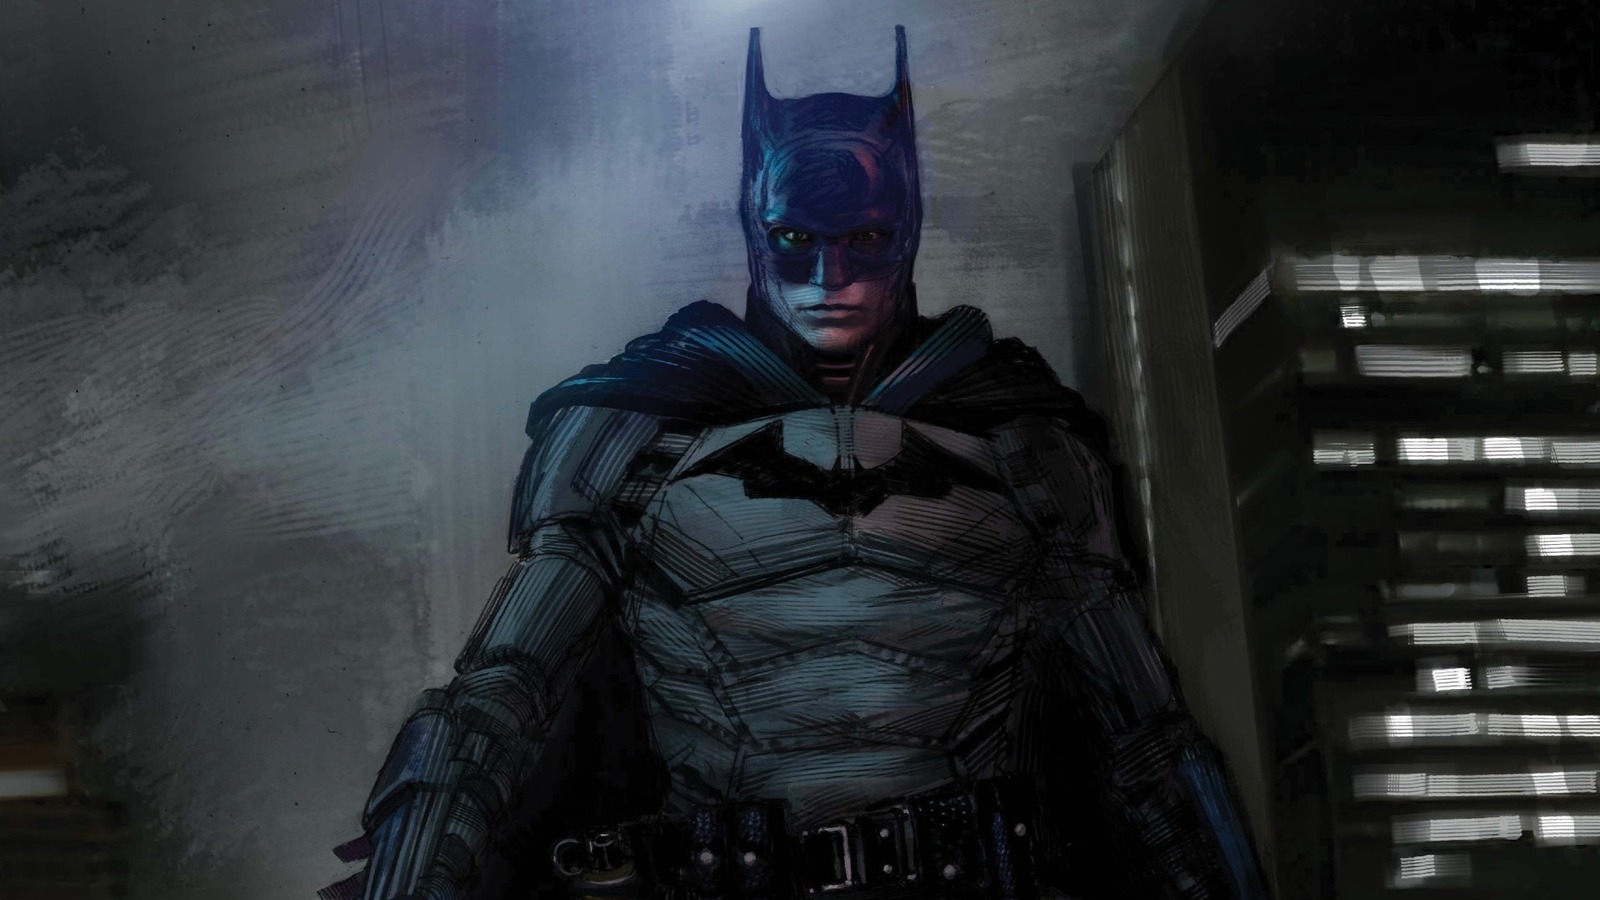 Gotham Knights gets new villains trailer, release date moved up